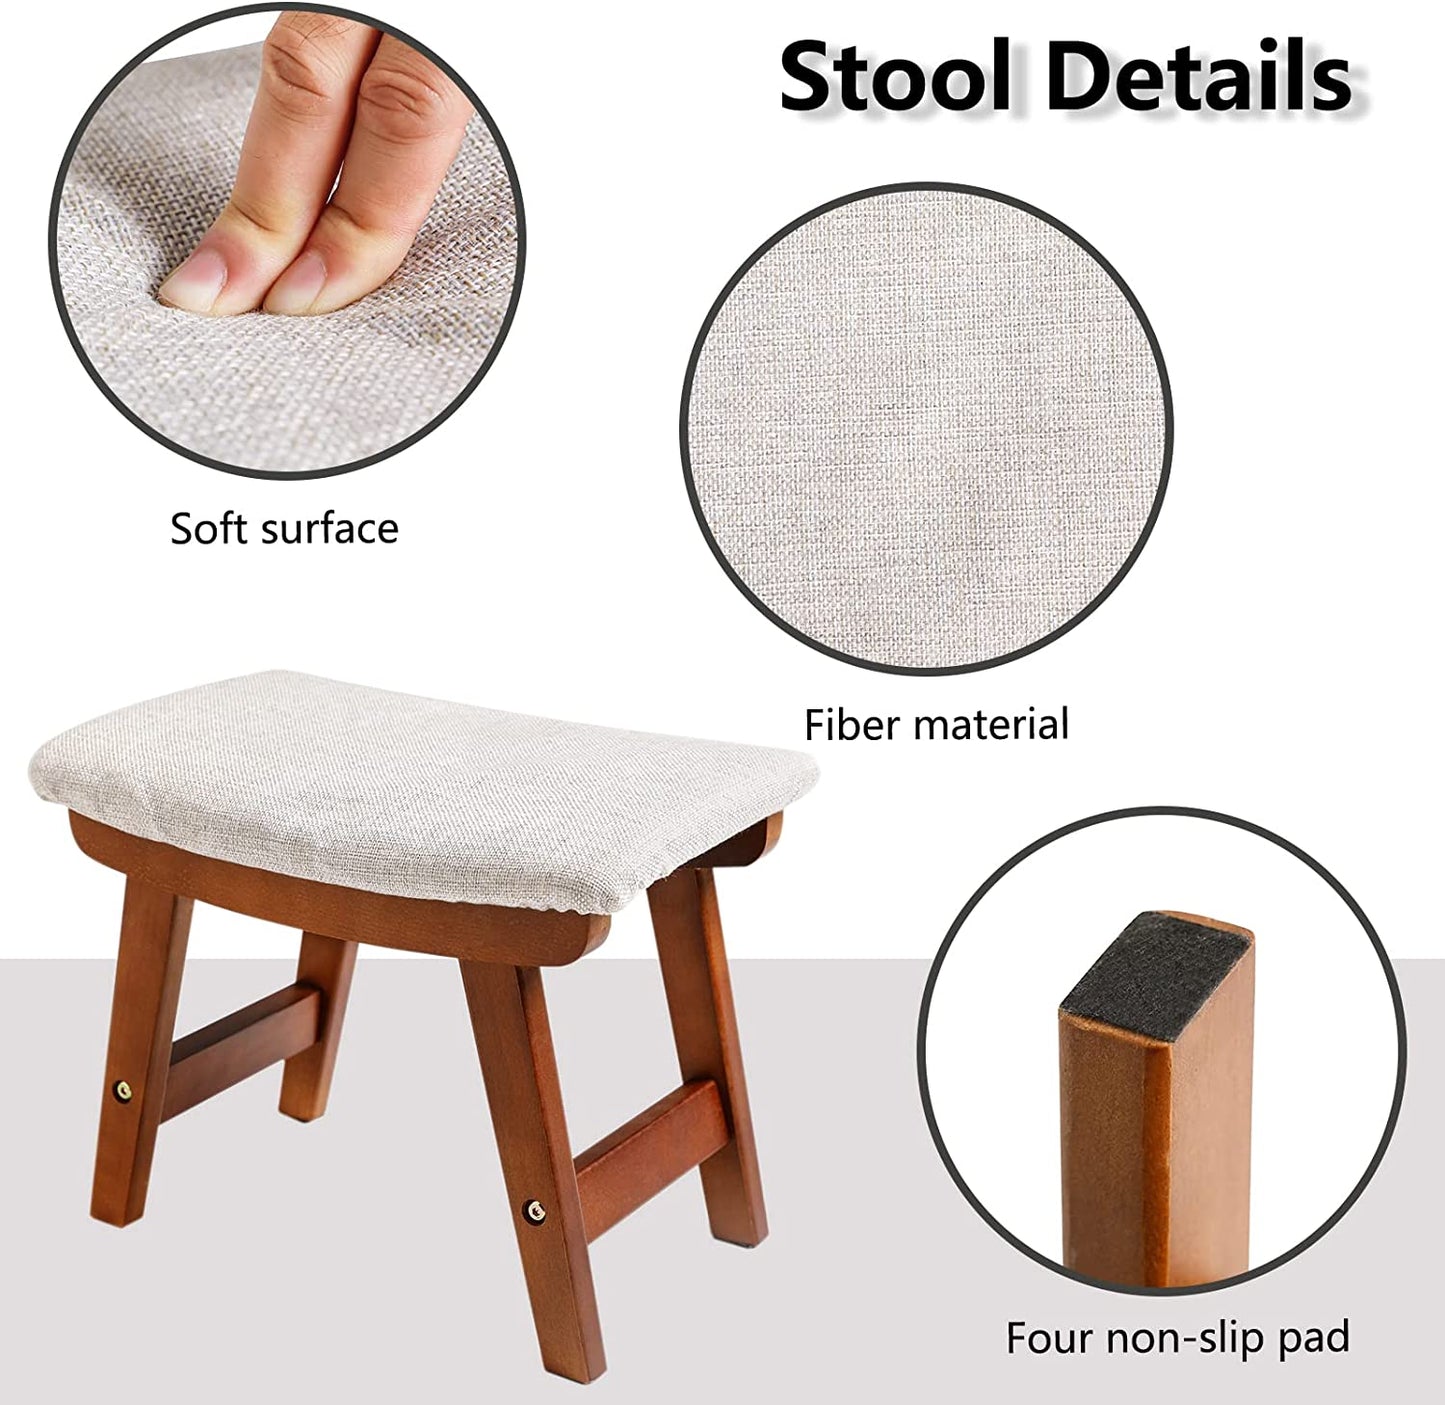 New Foot Stool, Foot Stool Small,Ottoman Foot Rest,Small Foot Stool,Foot Stool Under Desk,Wood Foot Stool for Living Room, Bedroom and Kitchen (Walnut Legs-Gray Cover)